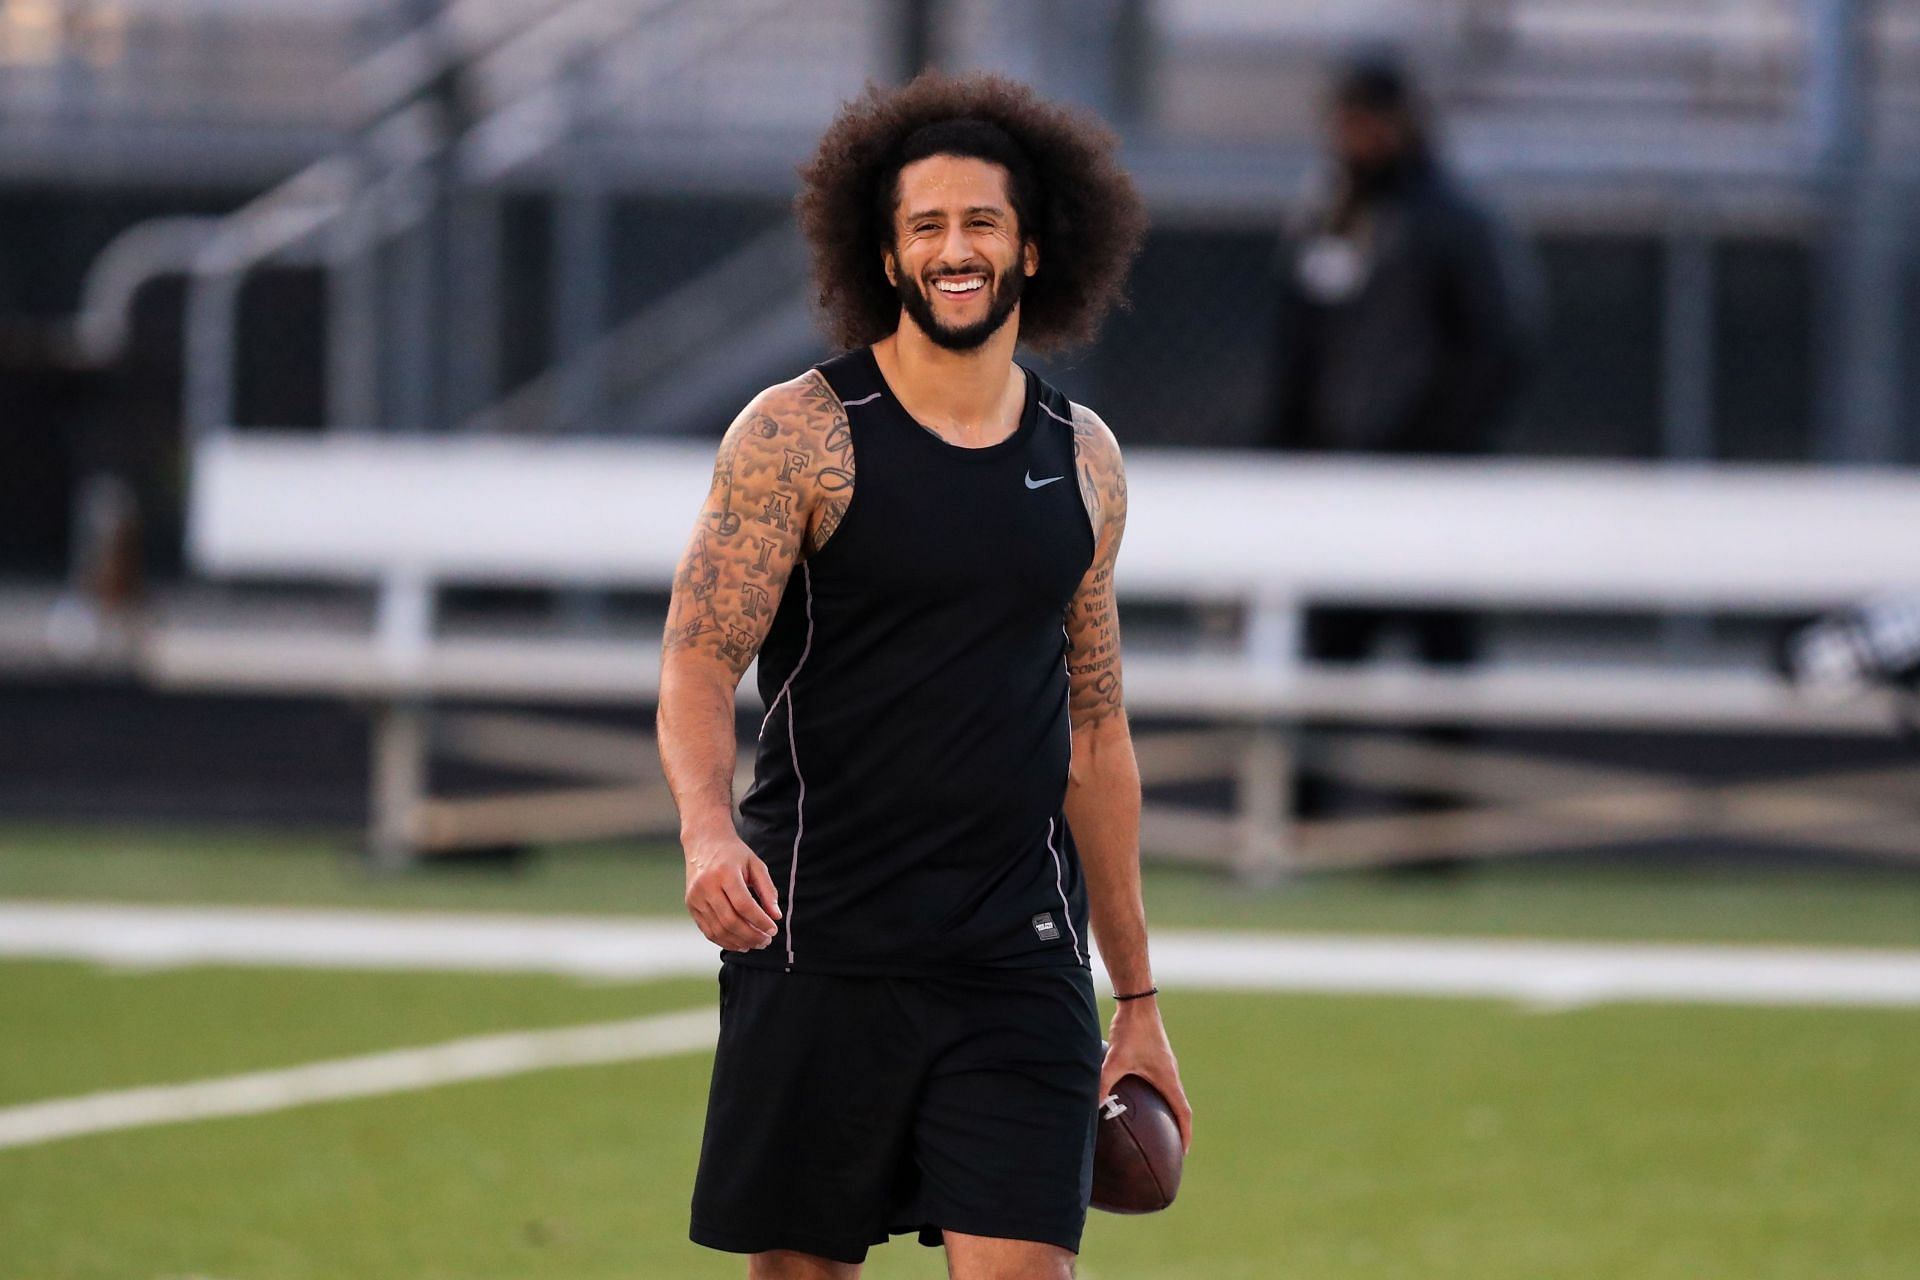 Colin Kaepernick during his NFL Workout in 2019